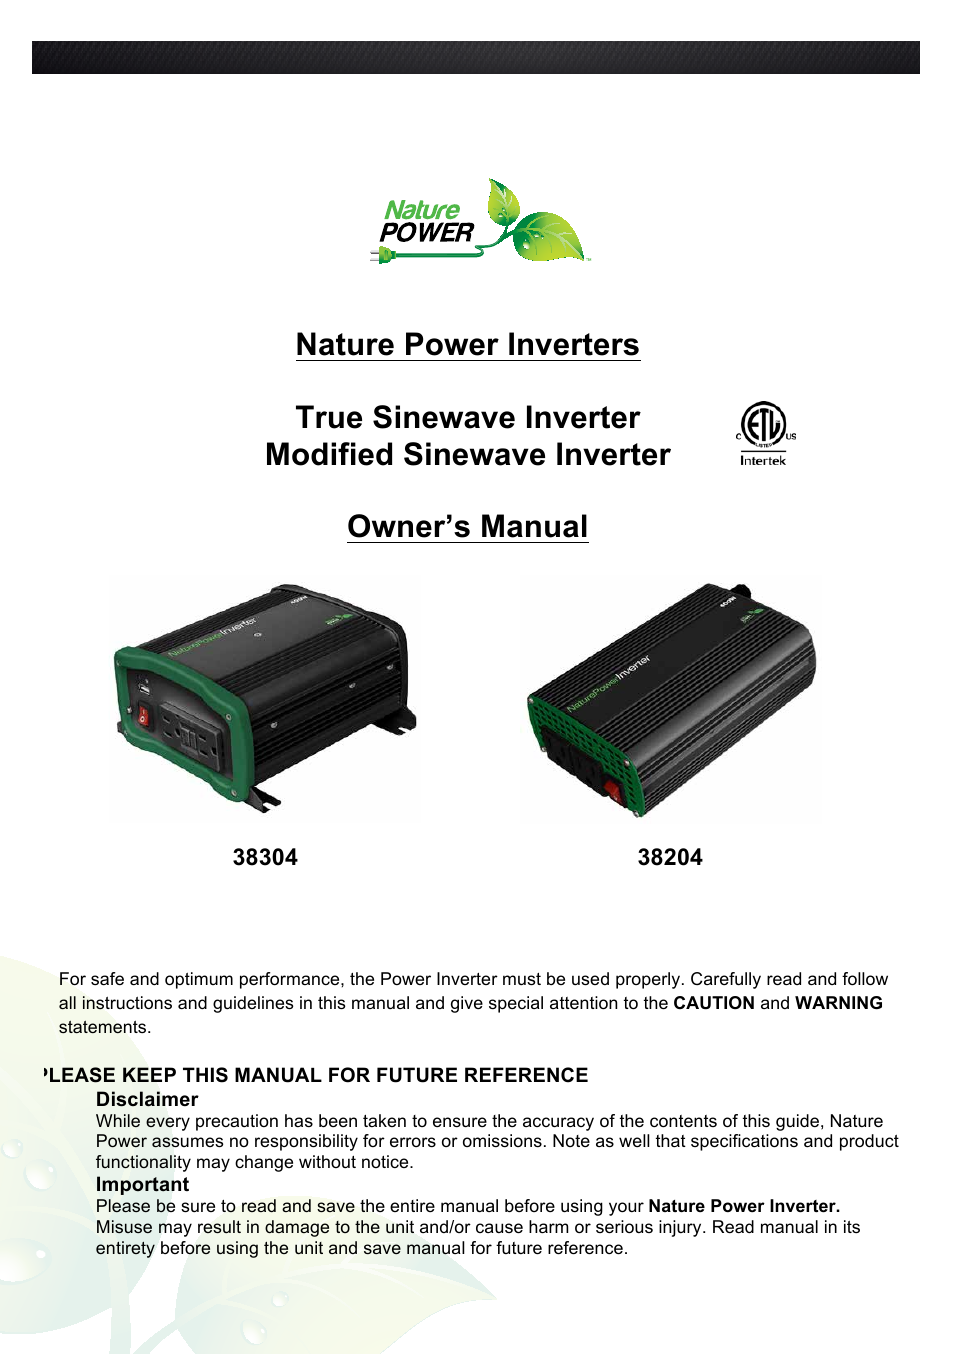 Nature Power Modified Sinewave Inverter 400w (38204) User Manual | 7 pages